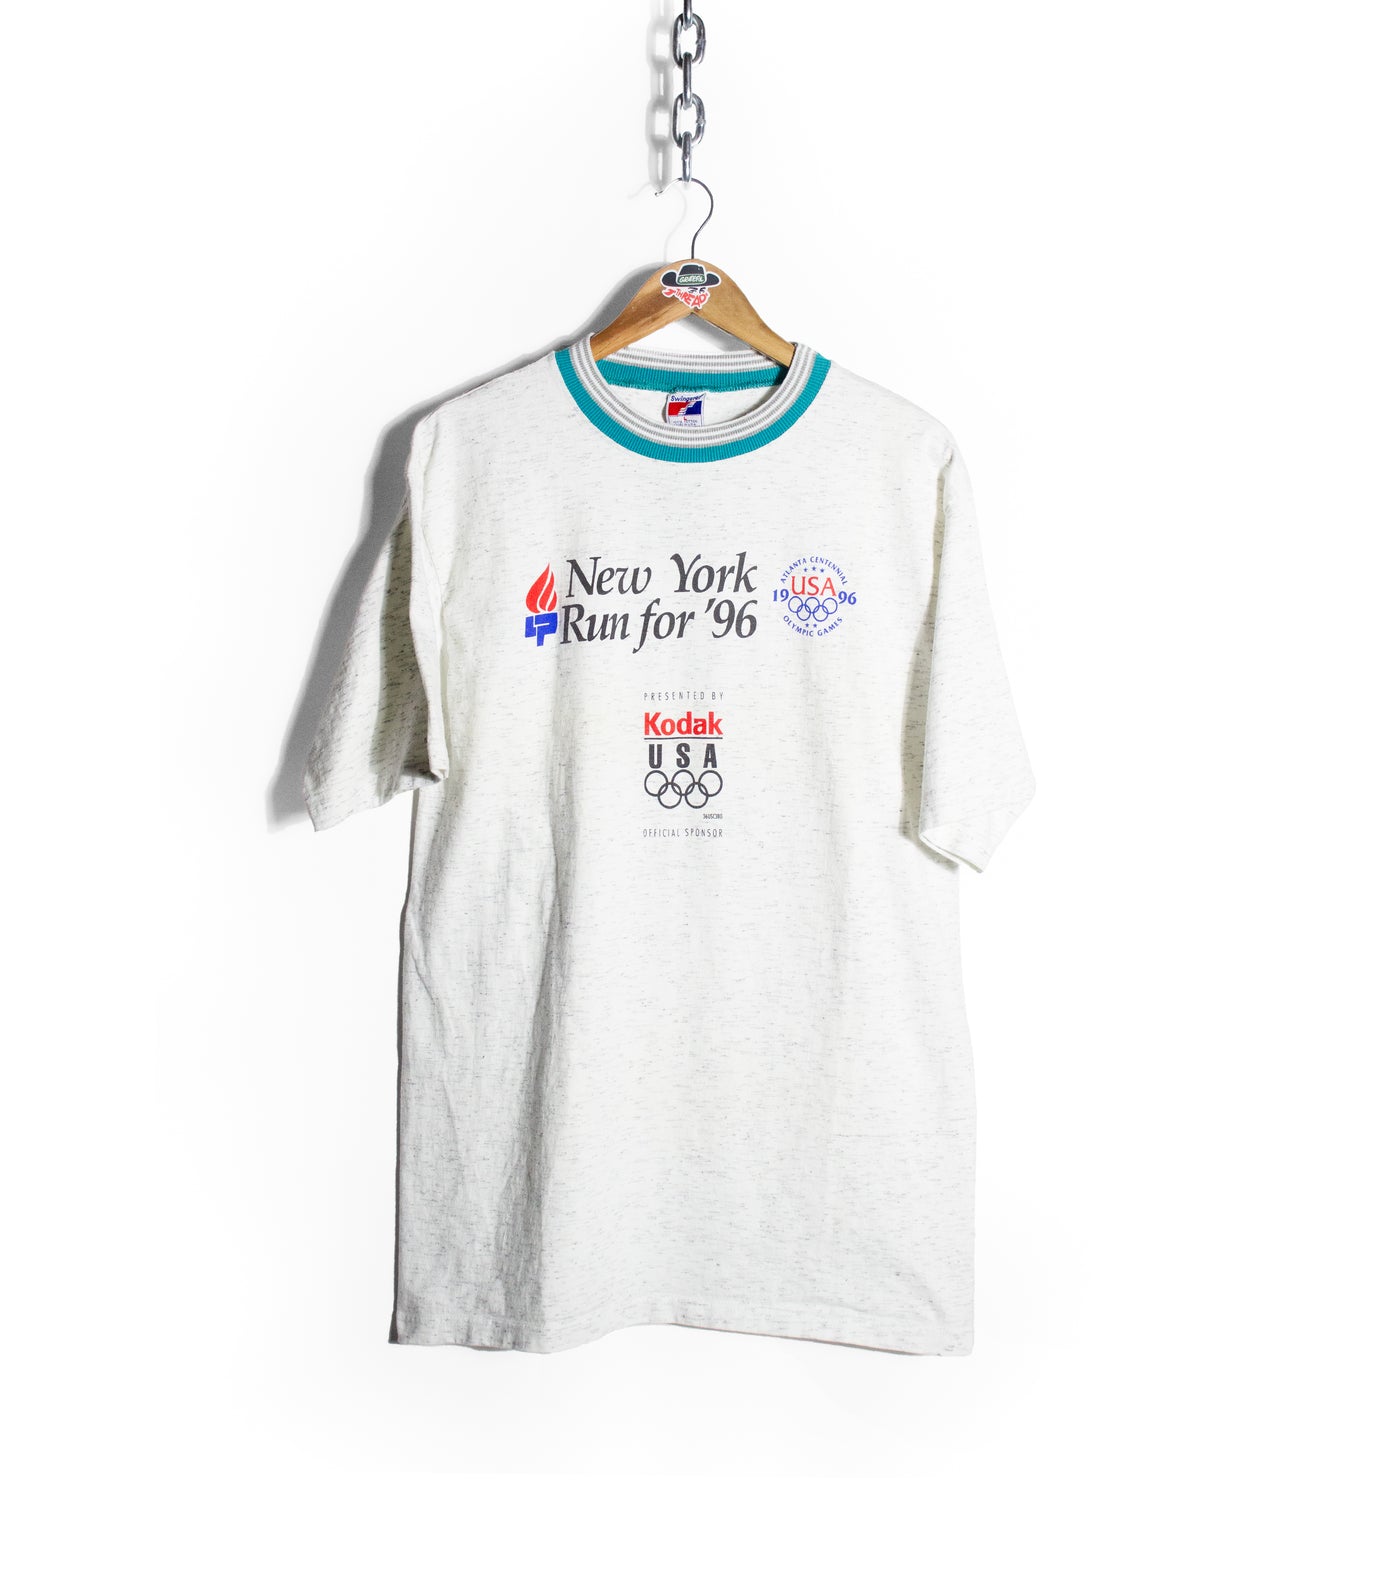 VIntage 1996 NY Run for '96 Olympic T-Shirt